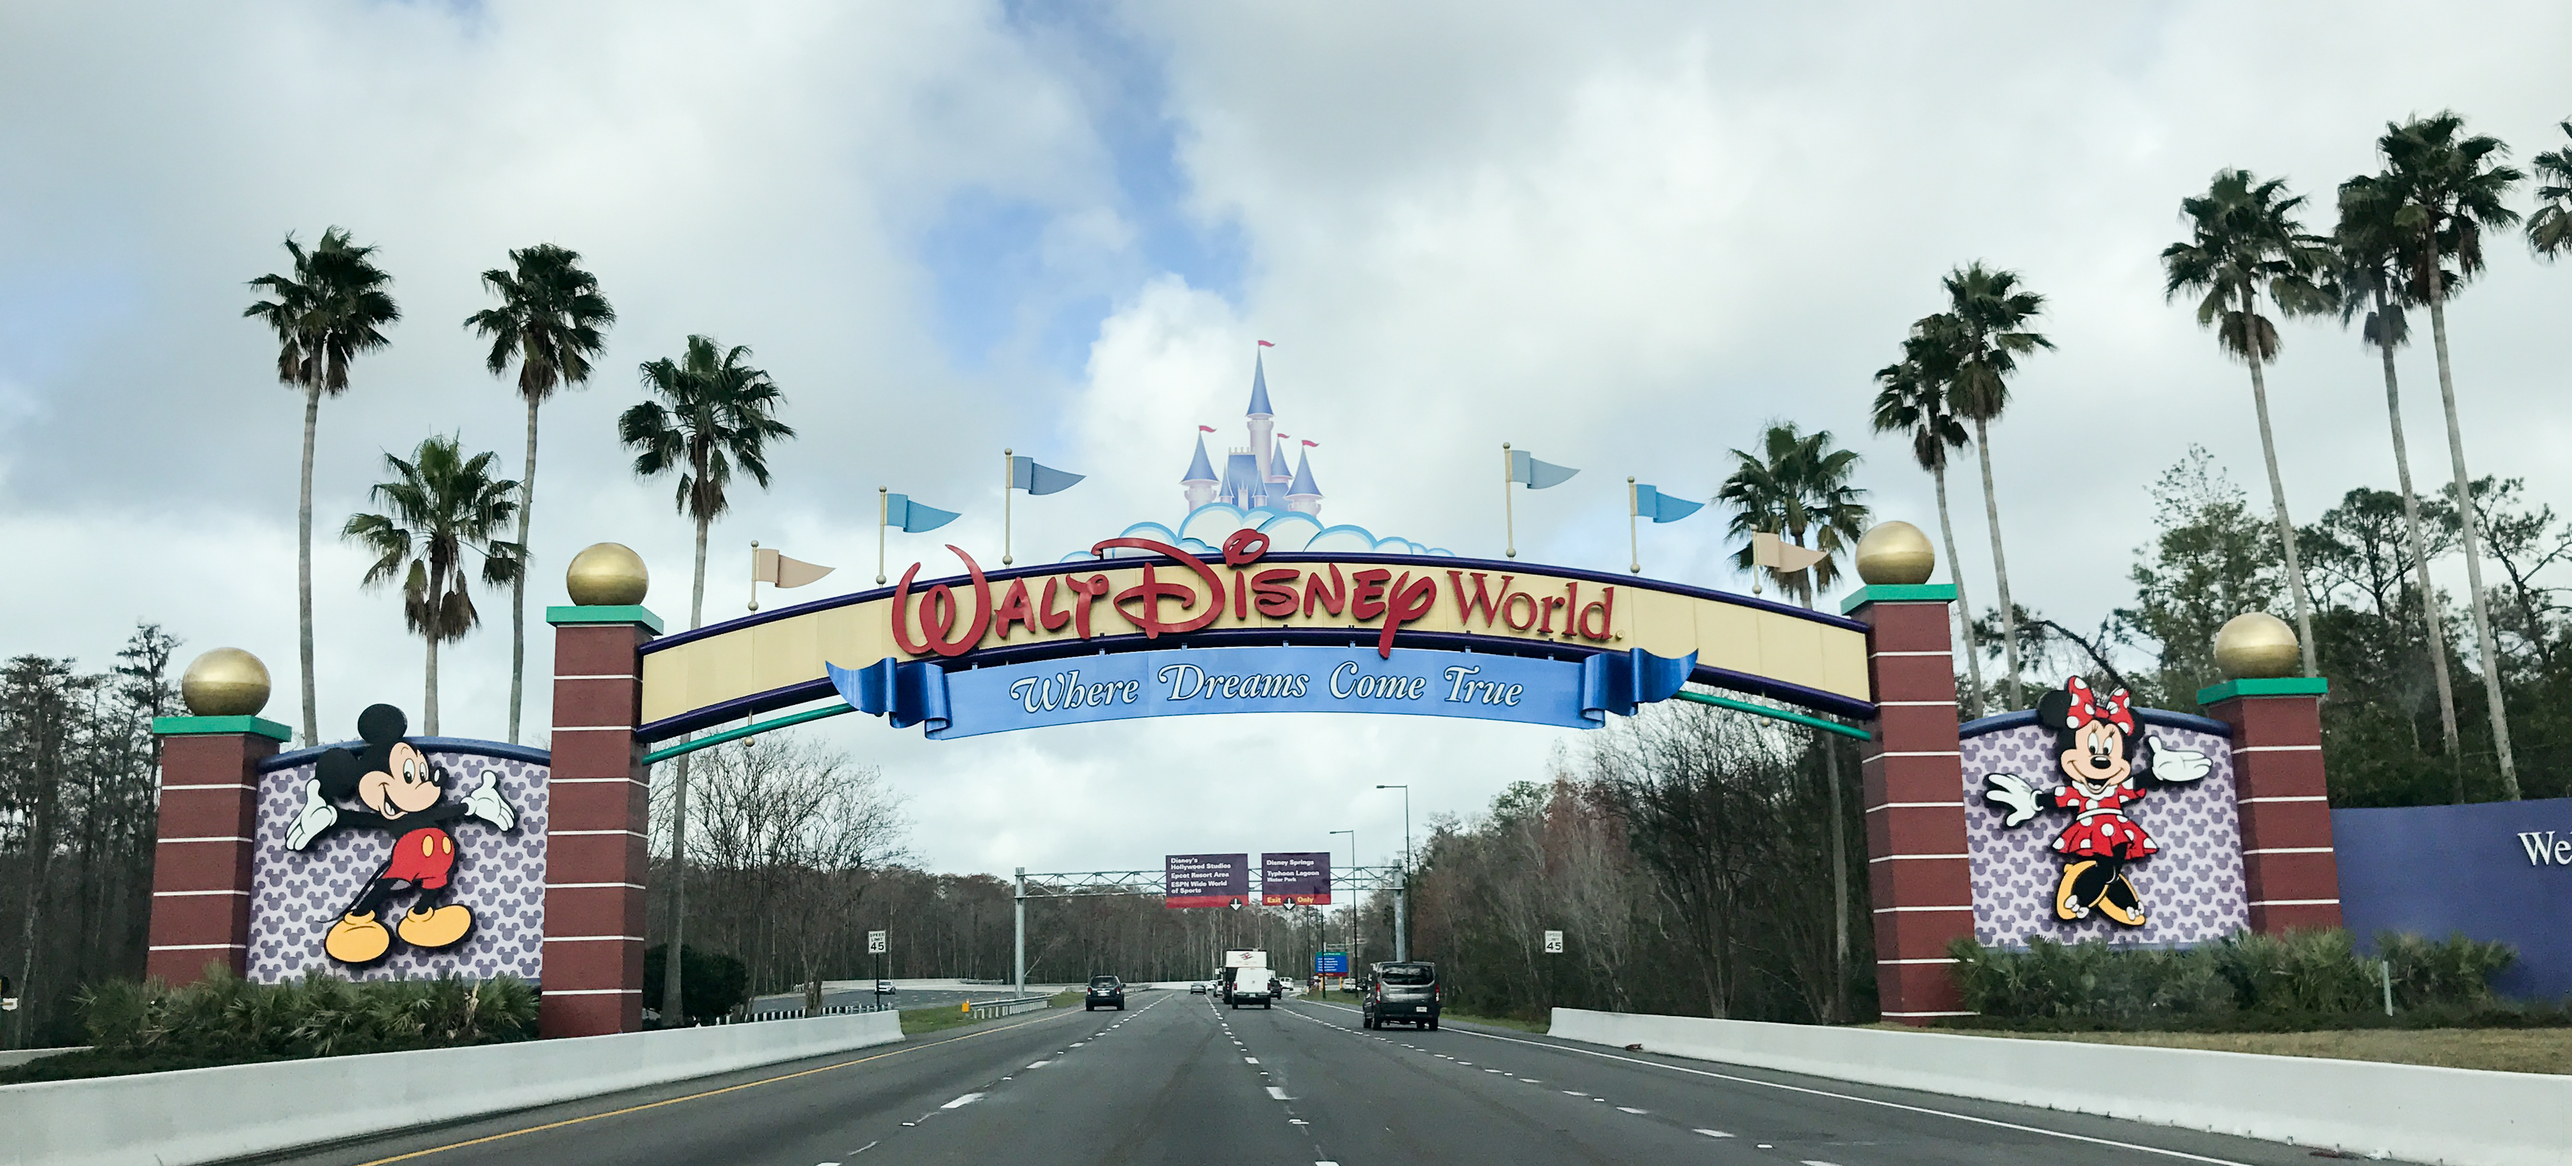 Walt Disney World Resort 5-day military promotional tickets from $257